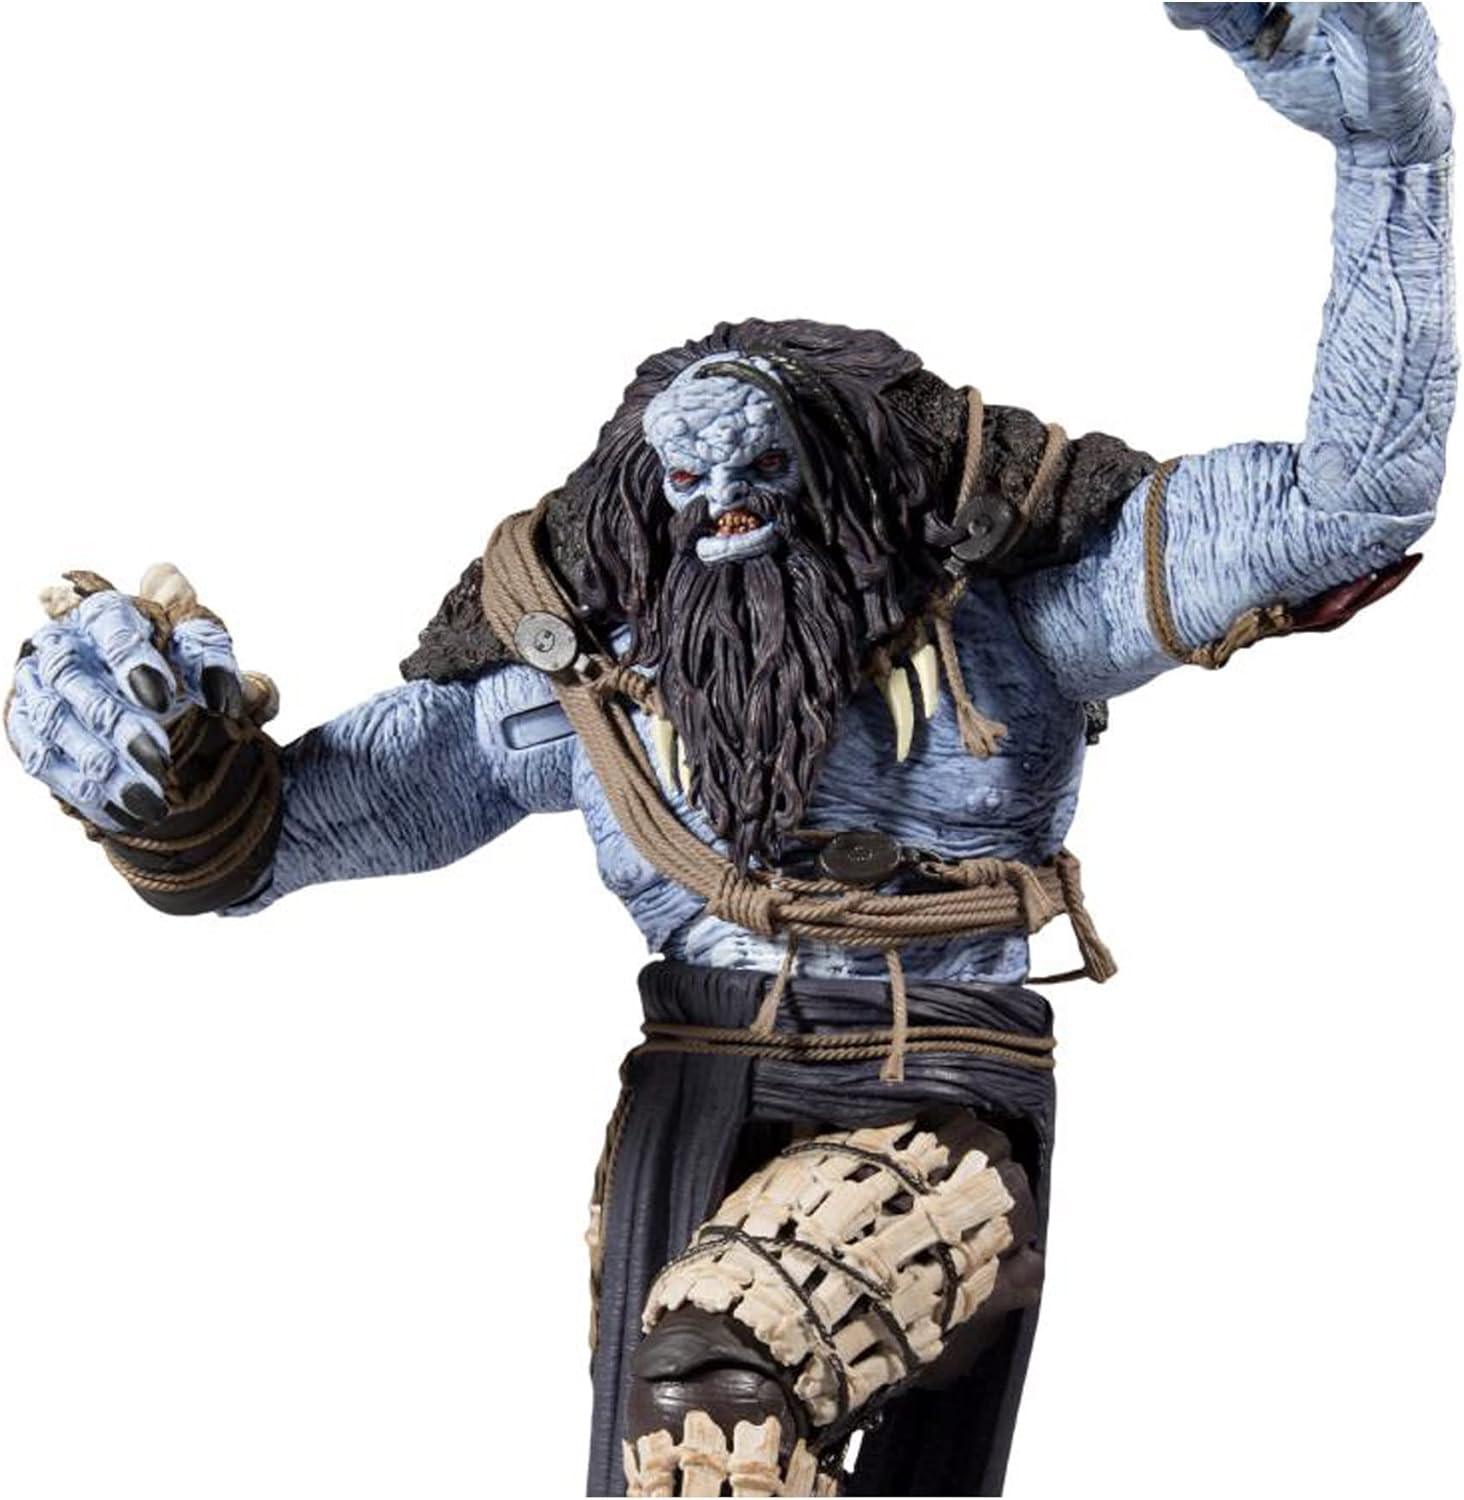 ACTION FIGURE ICE GIANT MEGAFIG 30 CM - THE WITCHER - Magic Dreams Store